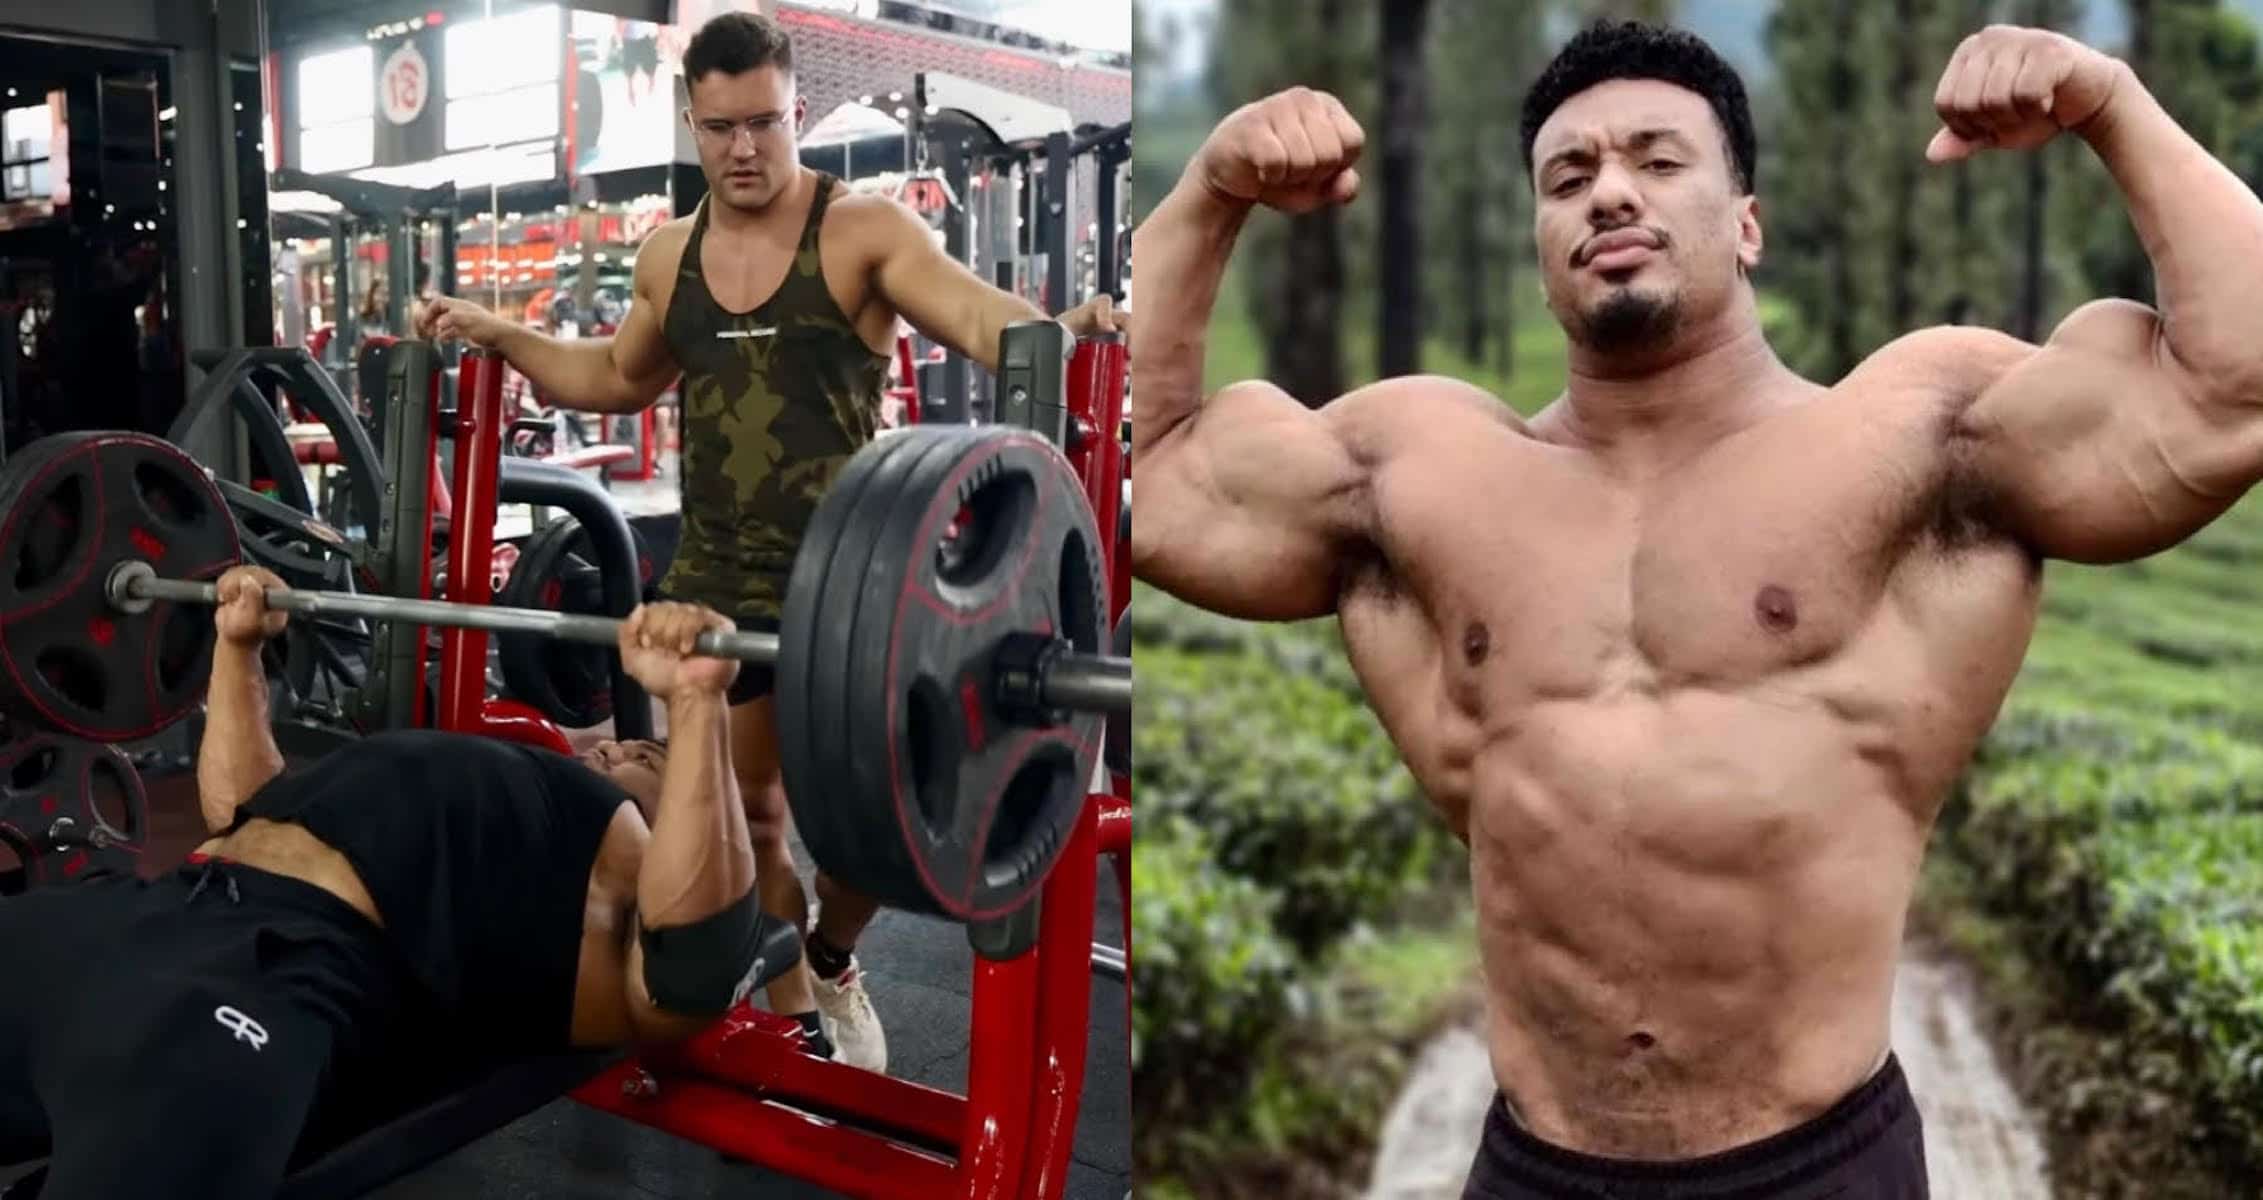 WATCH: Larry Wheels Sets PR With 44 Reps Of 308 Pounds On Bench Press